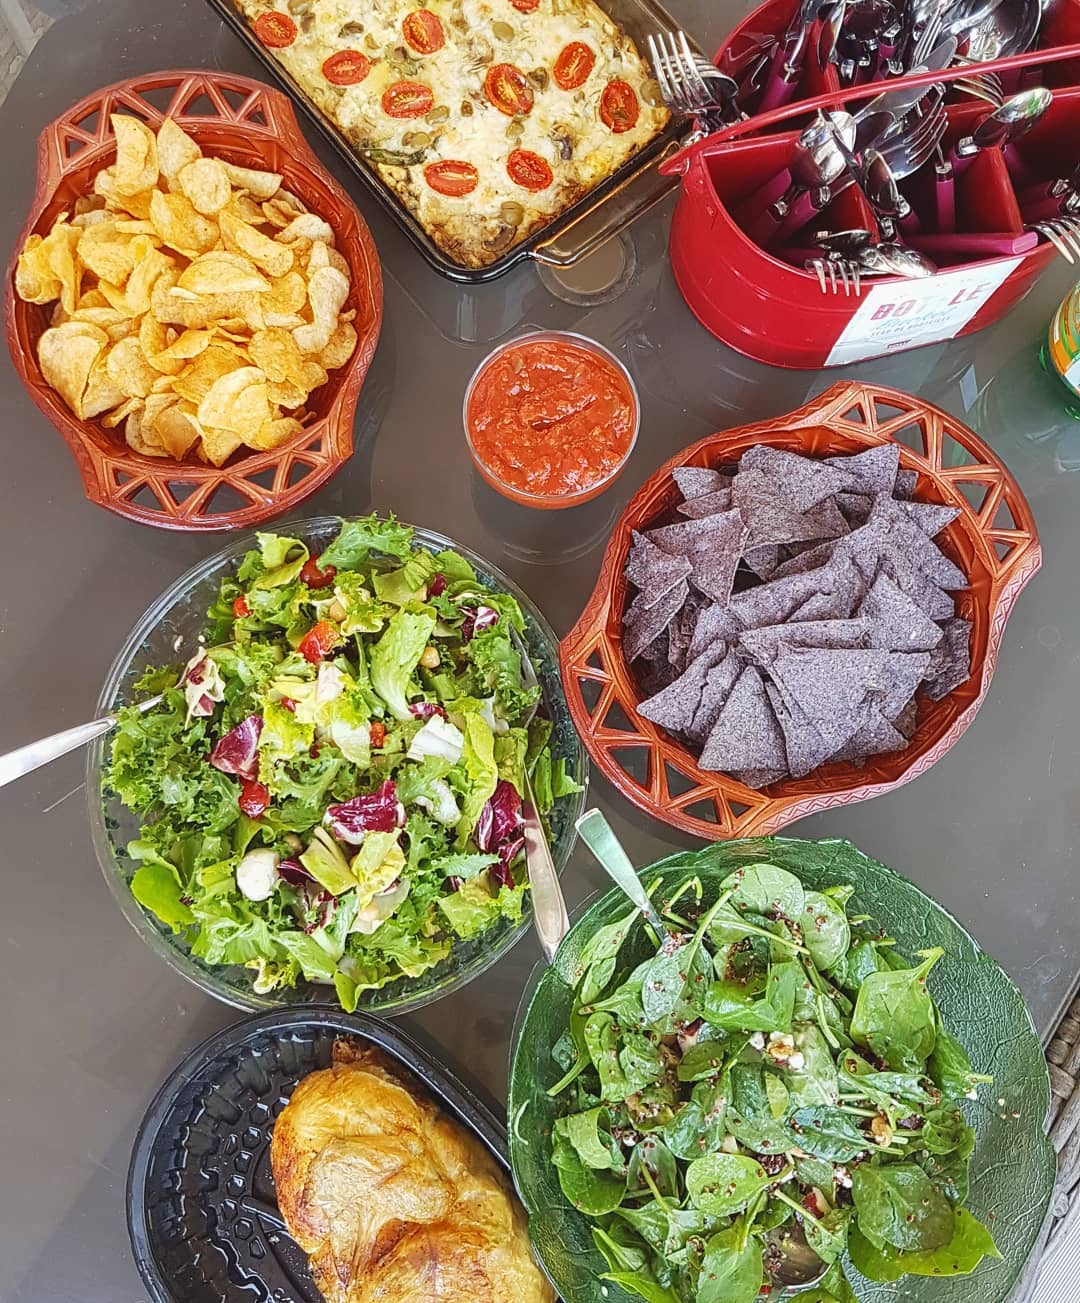 Bowls of Food at a Party. Photo by Instagram user @grubsfoods